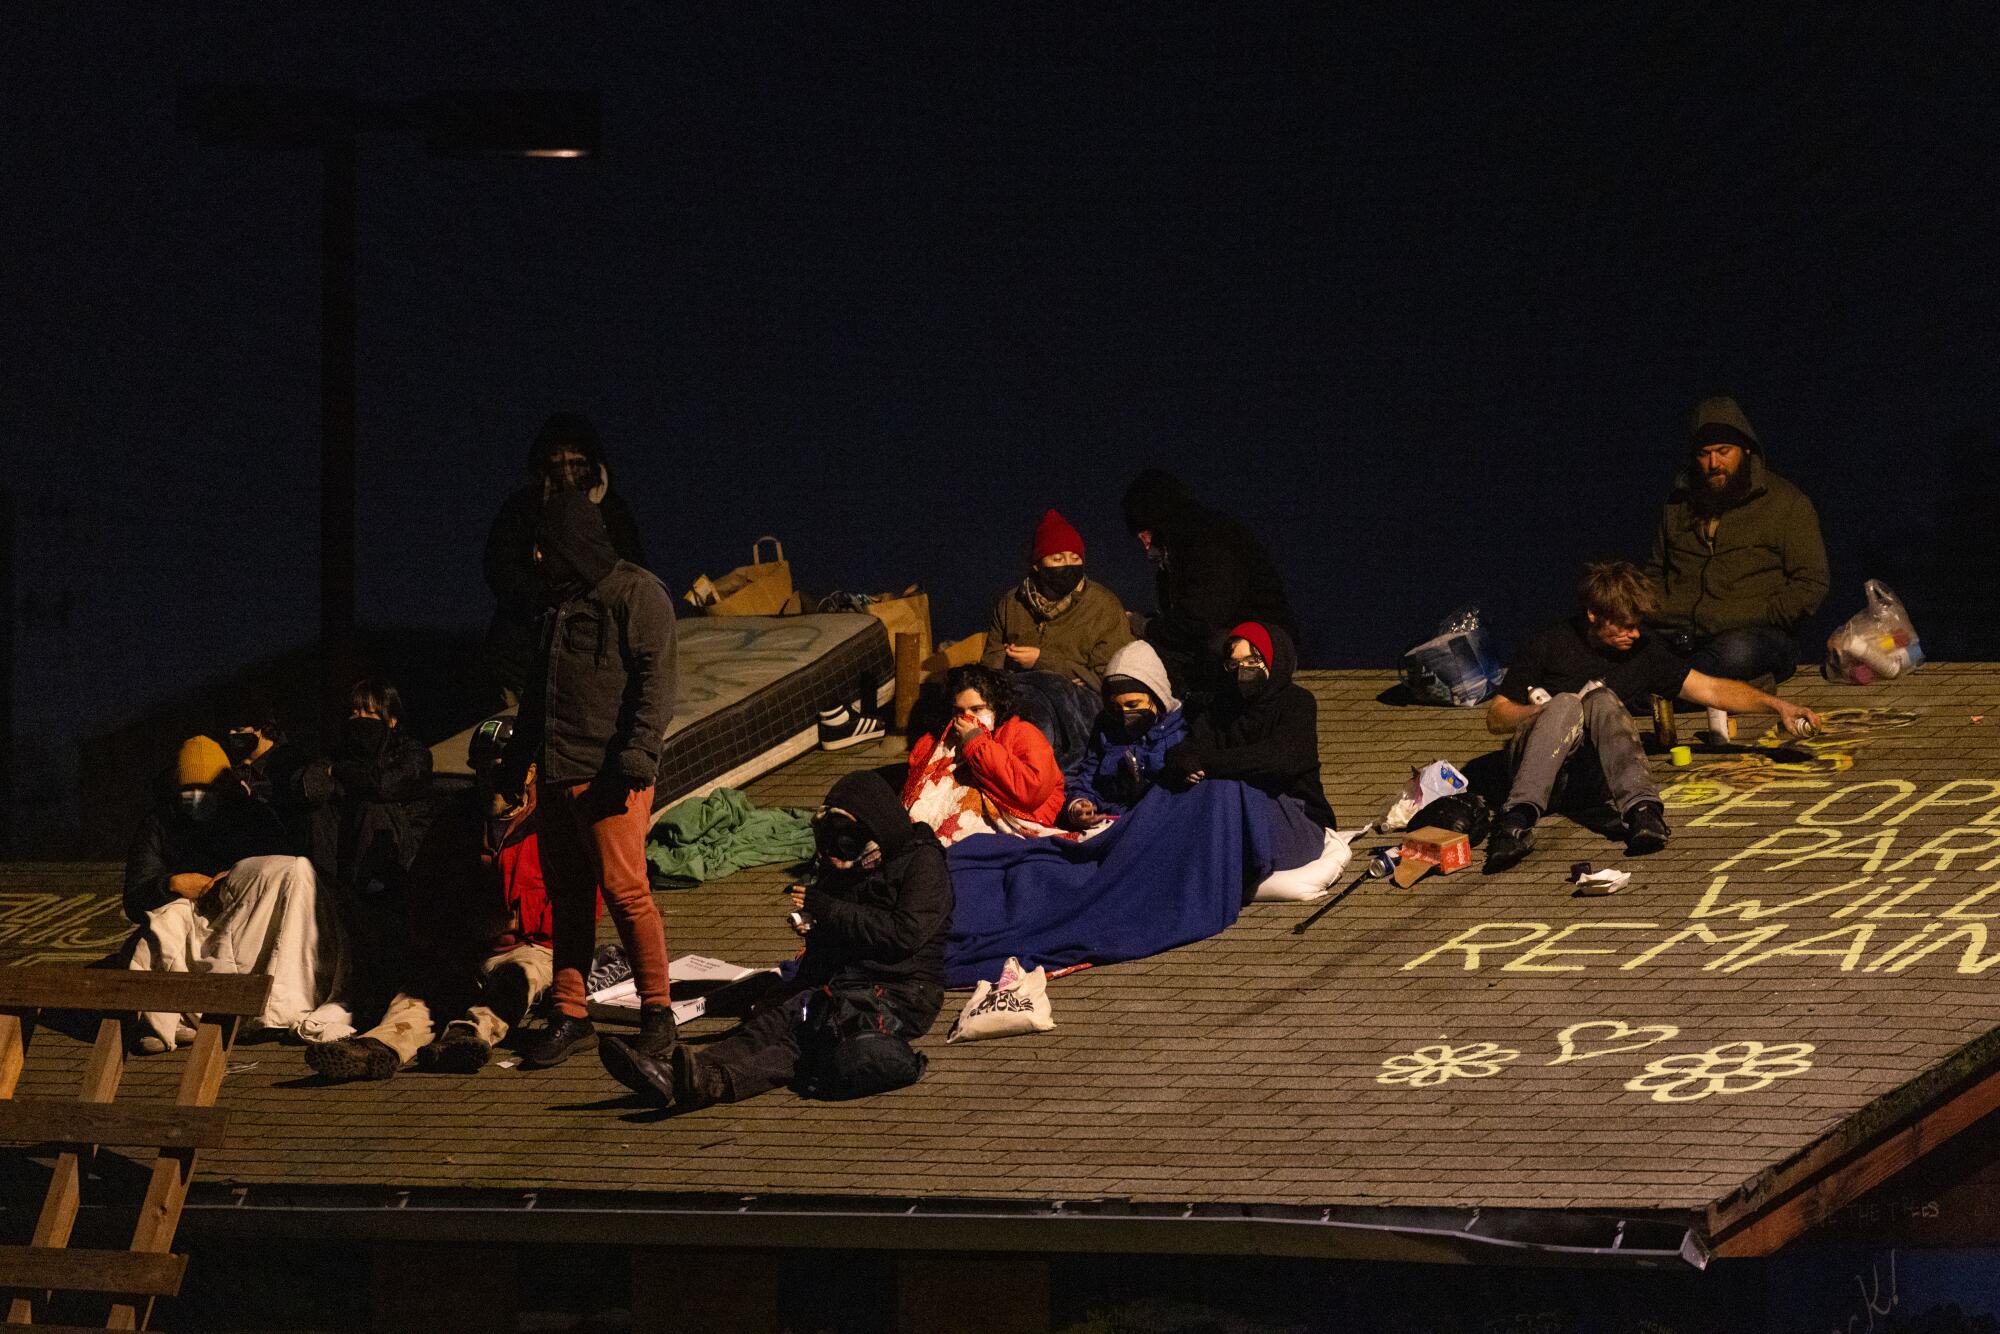 Some protesters retreated to the roof of a building in the park before later agreeing to come down.